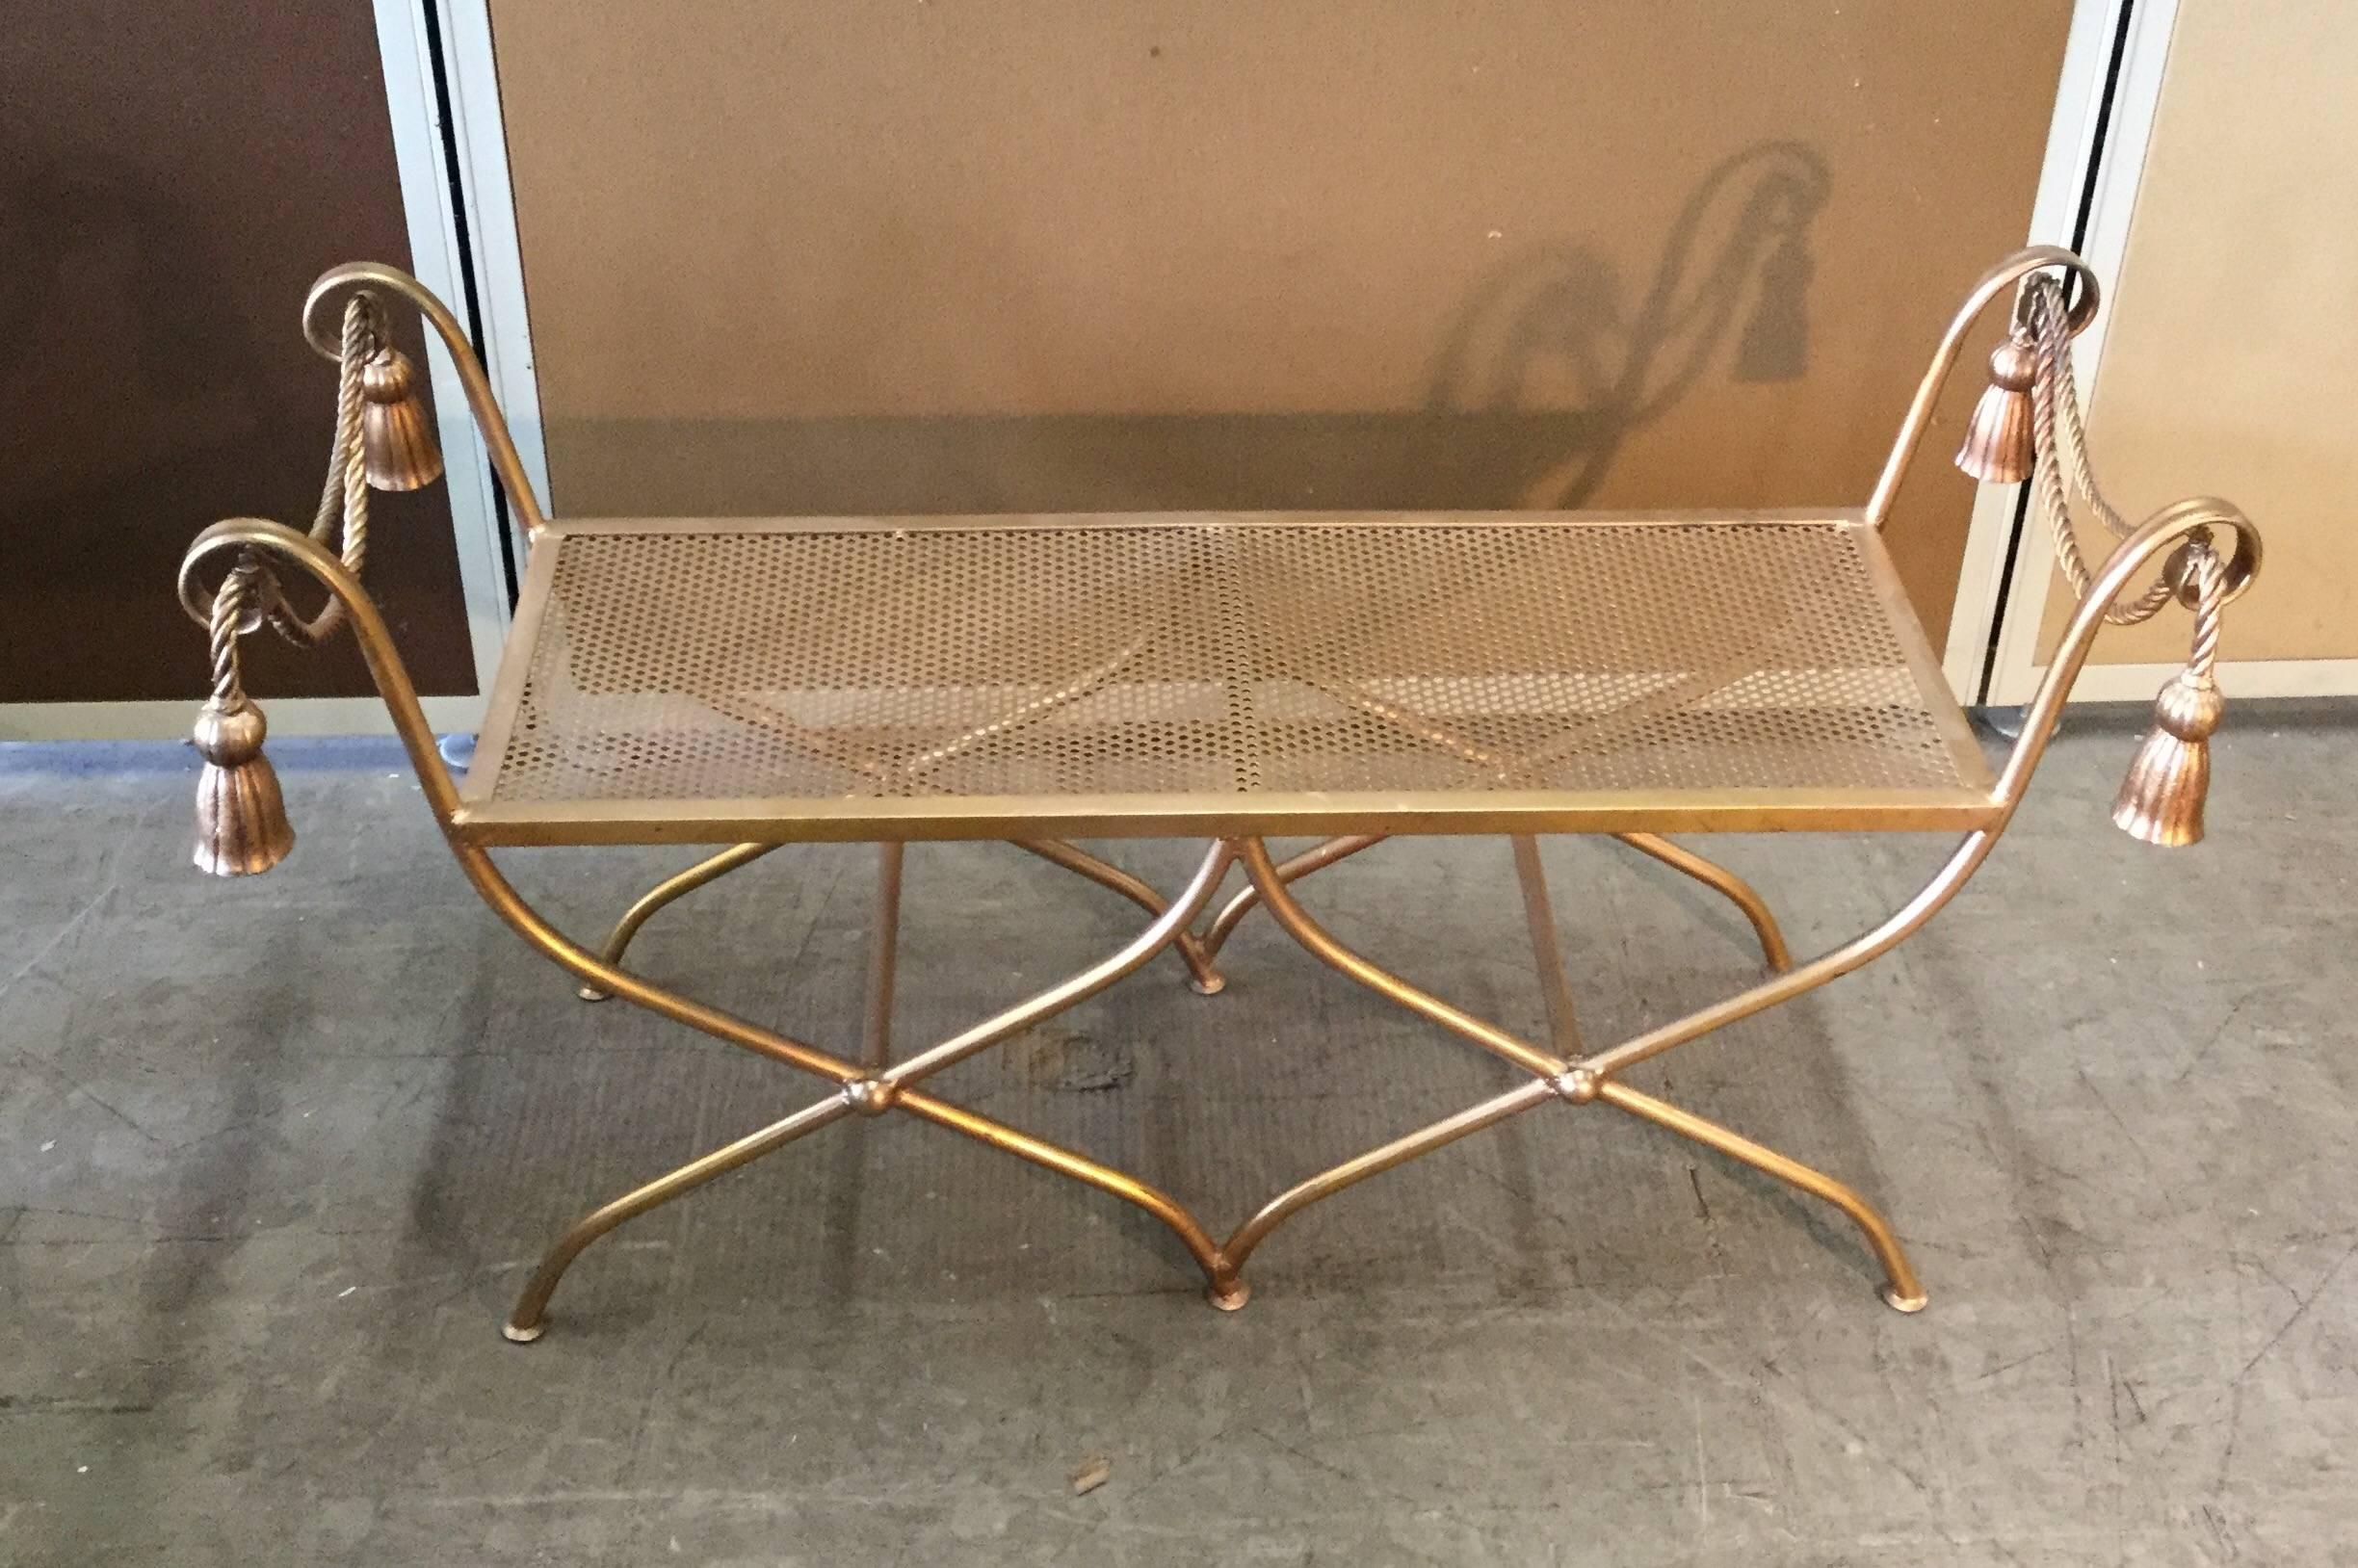 A fanciful gilt iron bench with criss crossed legs, expanded wire deck and rope and tassel decorations. Italian, circa 1970.